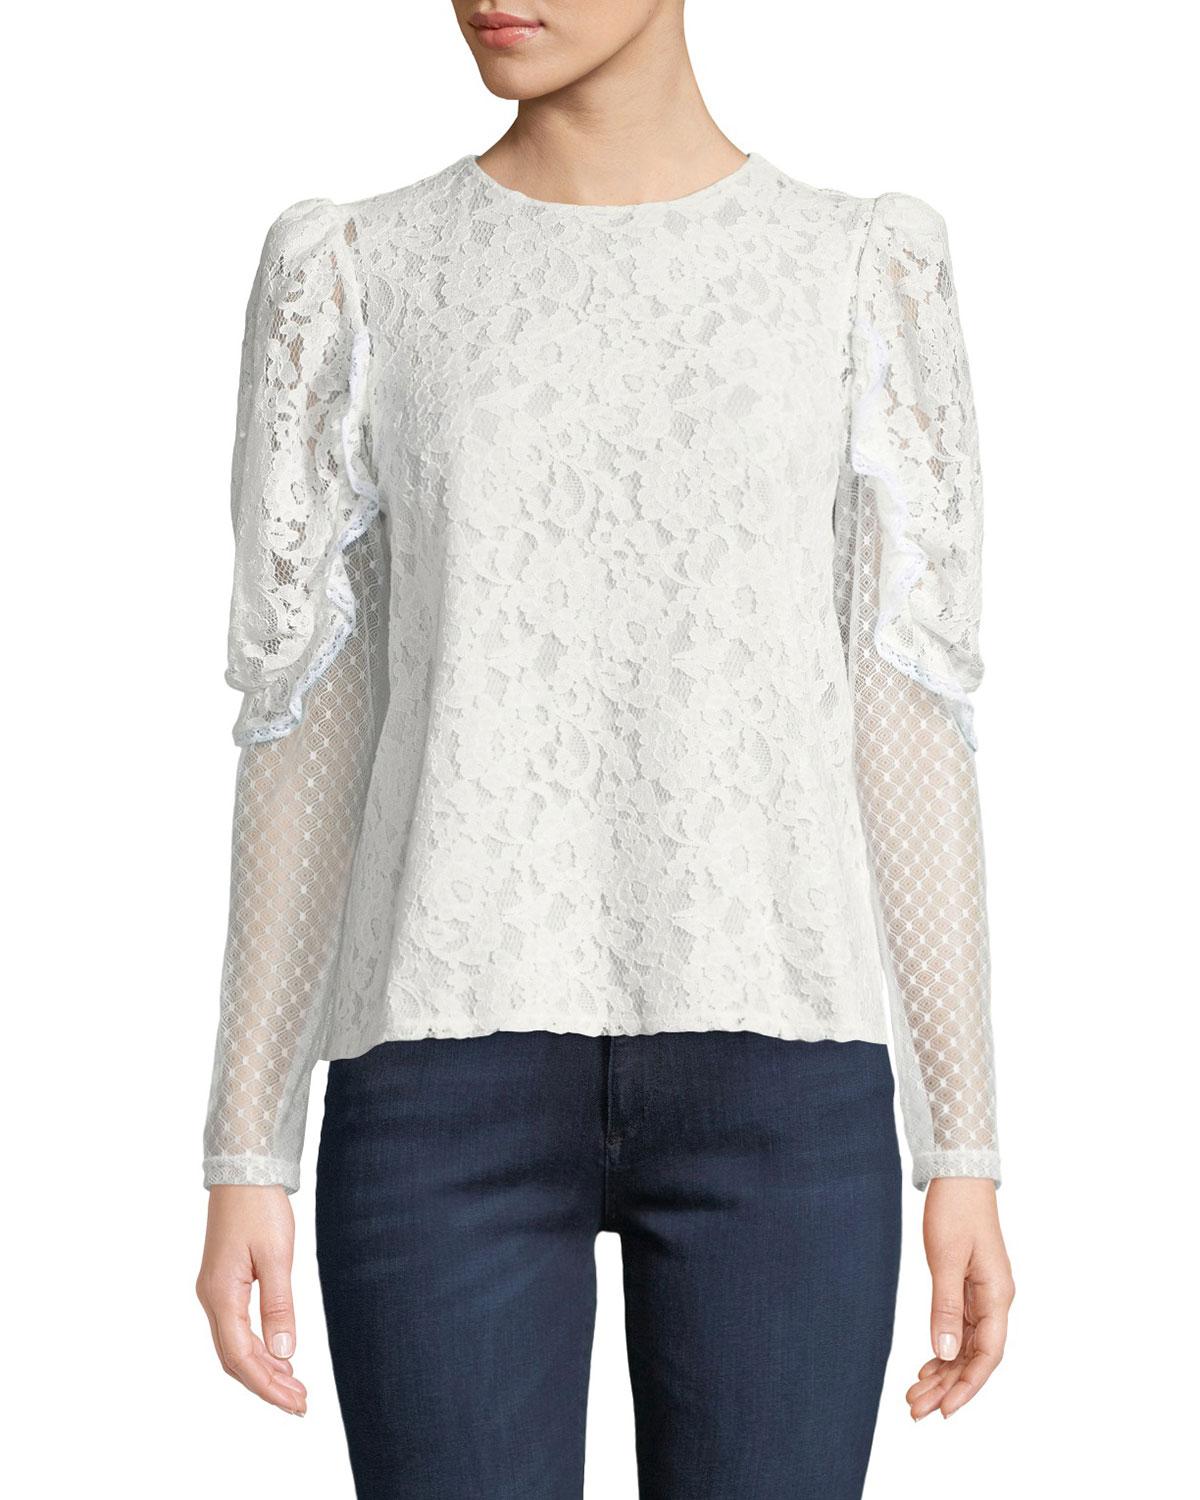 Lyst - See By Chloé Long-sleeve Lace Ruffle Crewneck Blouse in White